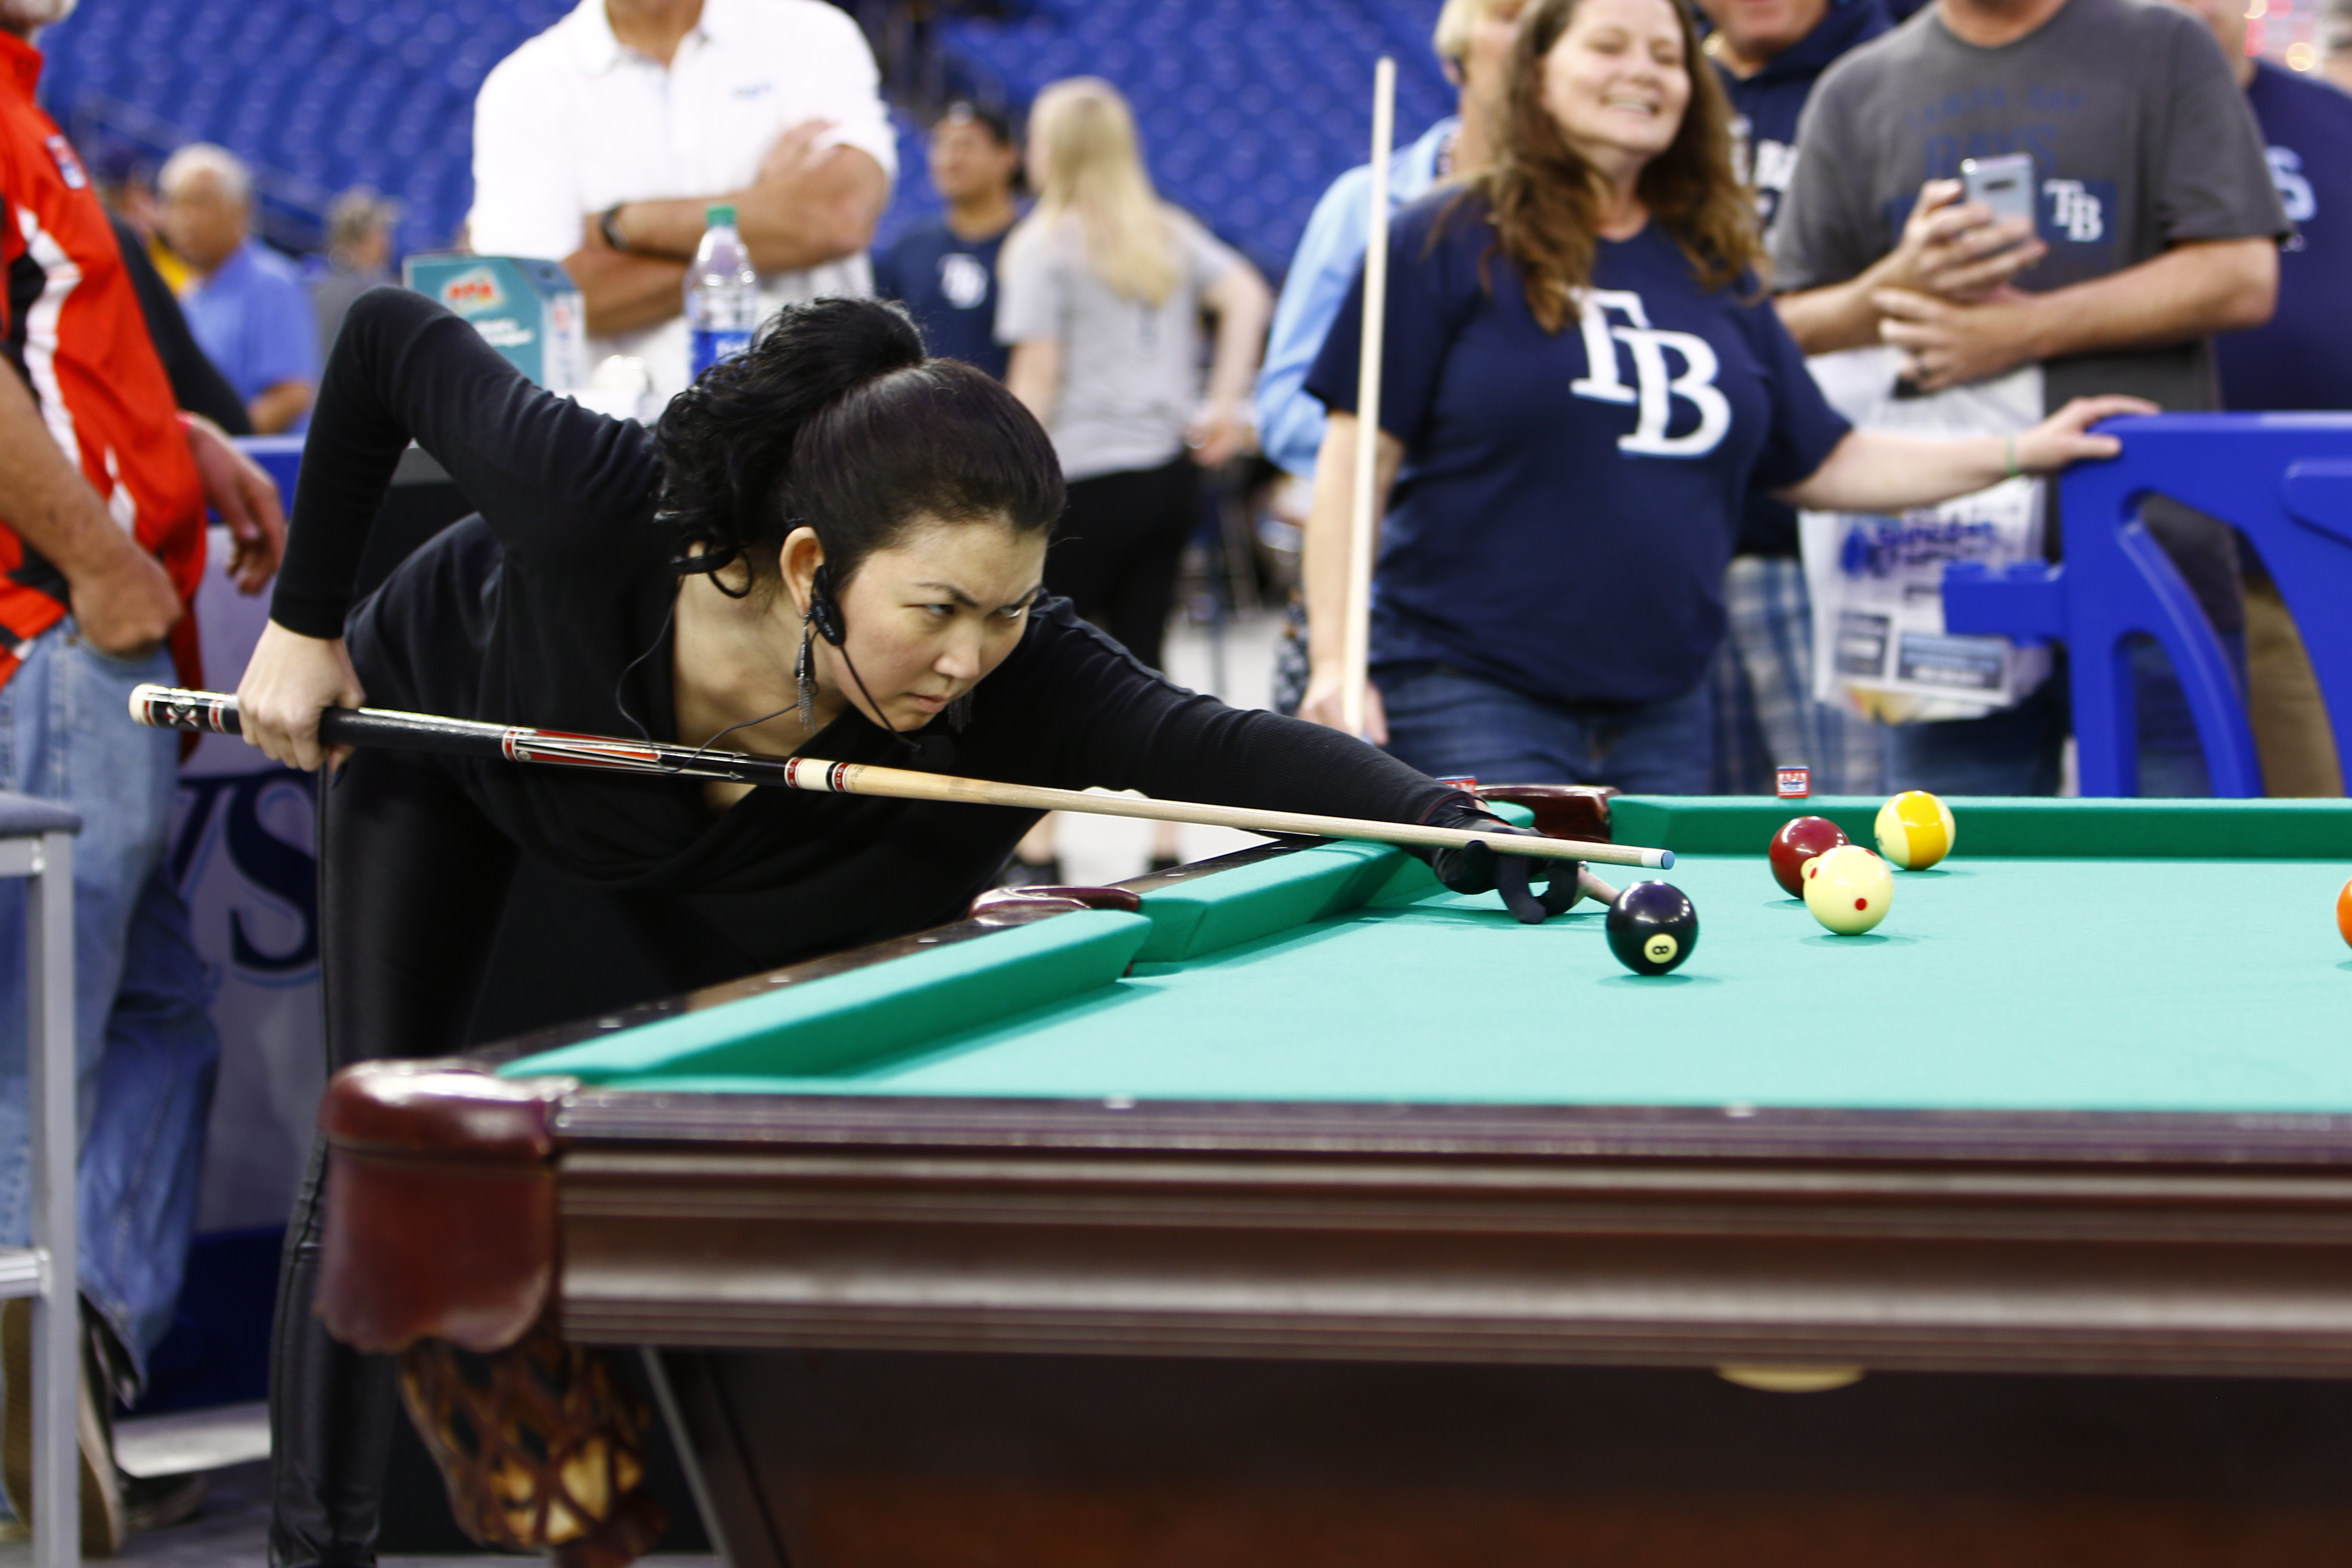 Billiards star Jeanette Lee, known as 'Black Widow,' battling cancer in  Tampa